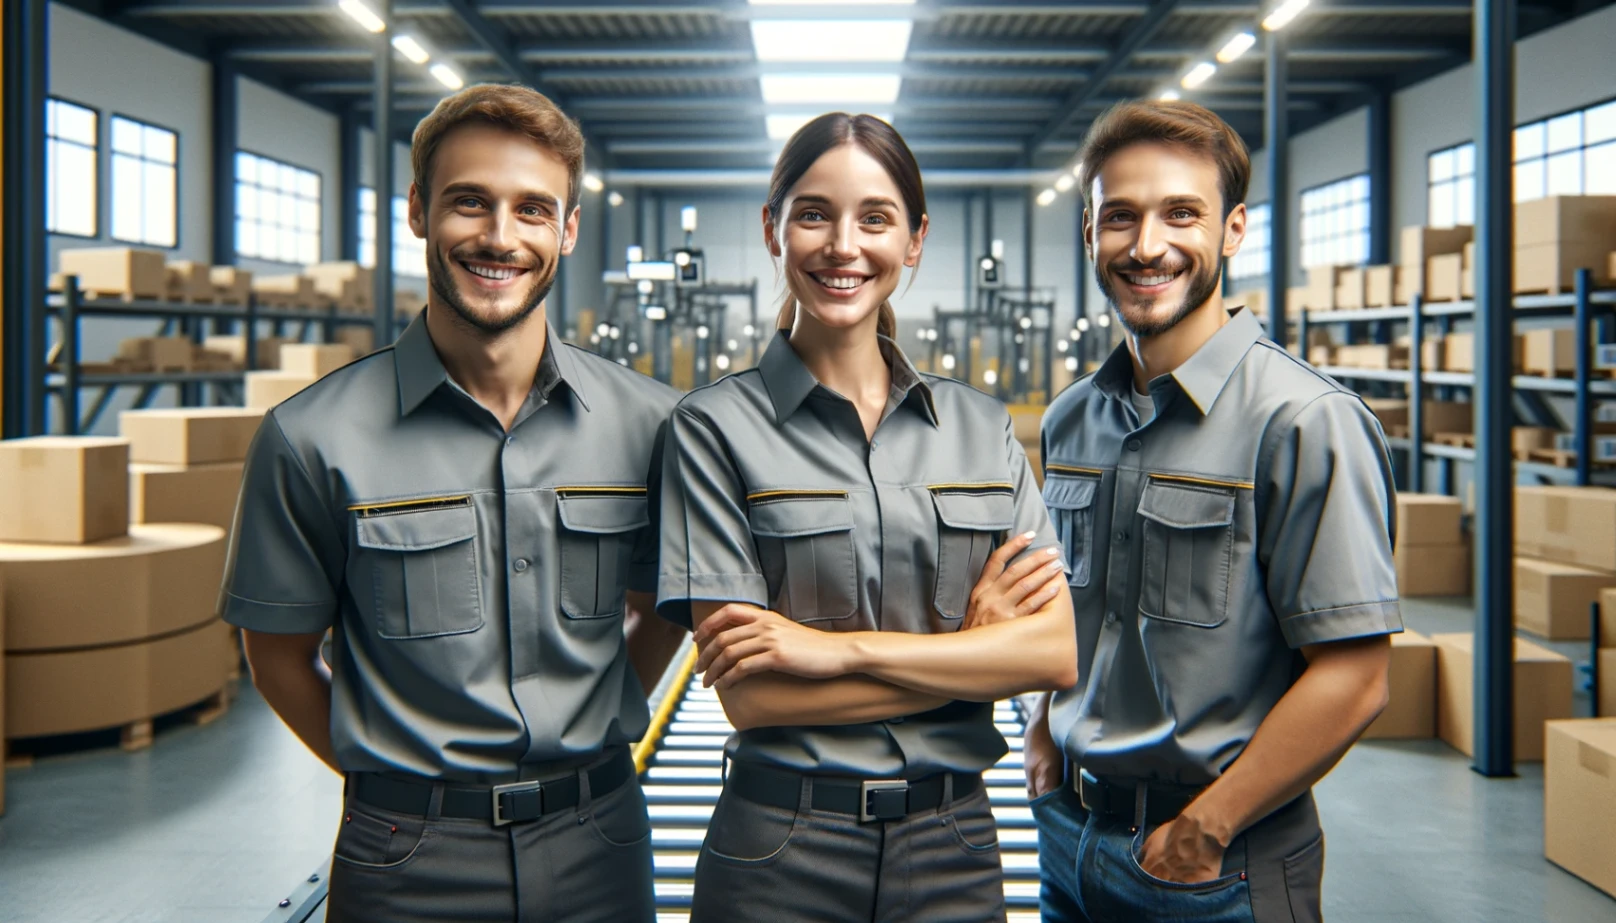 United Parcel Service Careers: Learn How to Apply Today